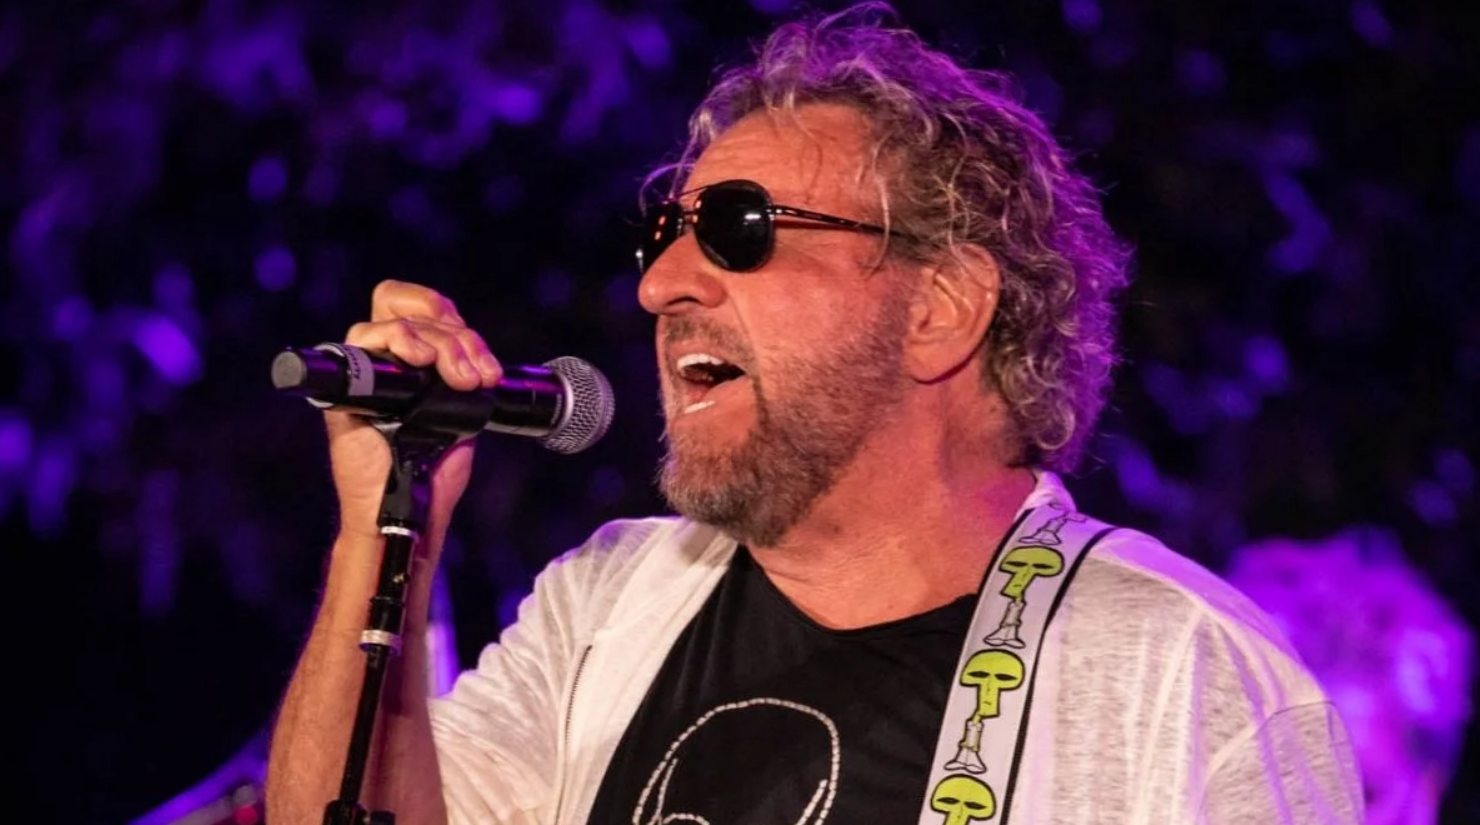 Sammy Hagar canta “Why Can’t This Be Love” em show do The Killers